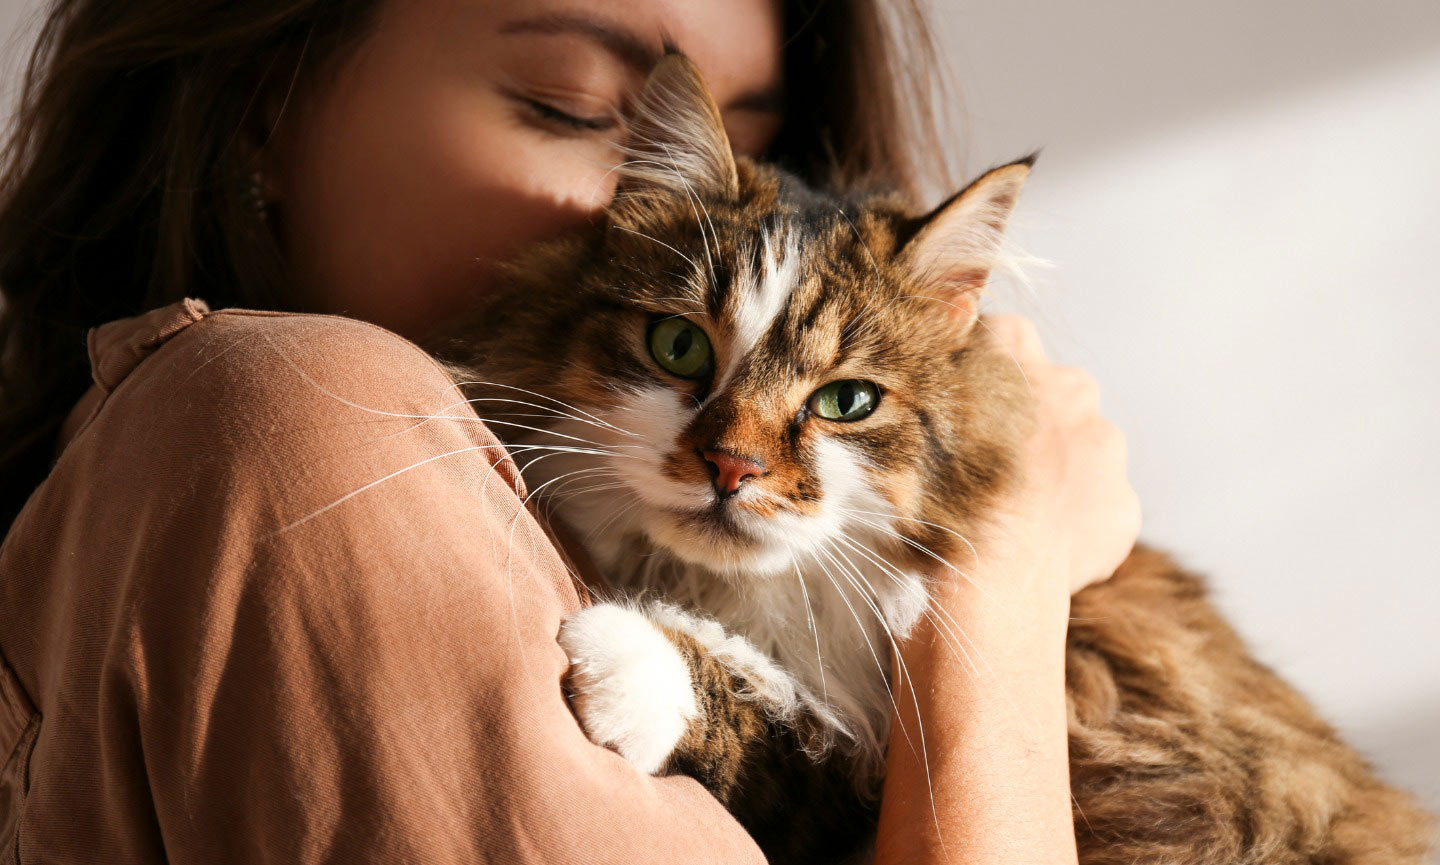 Should You Give a Pet as a Gift? Ask Yourself These 6 Questions First